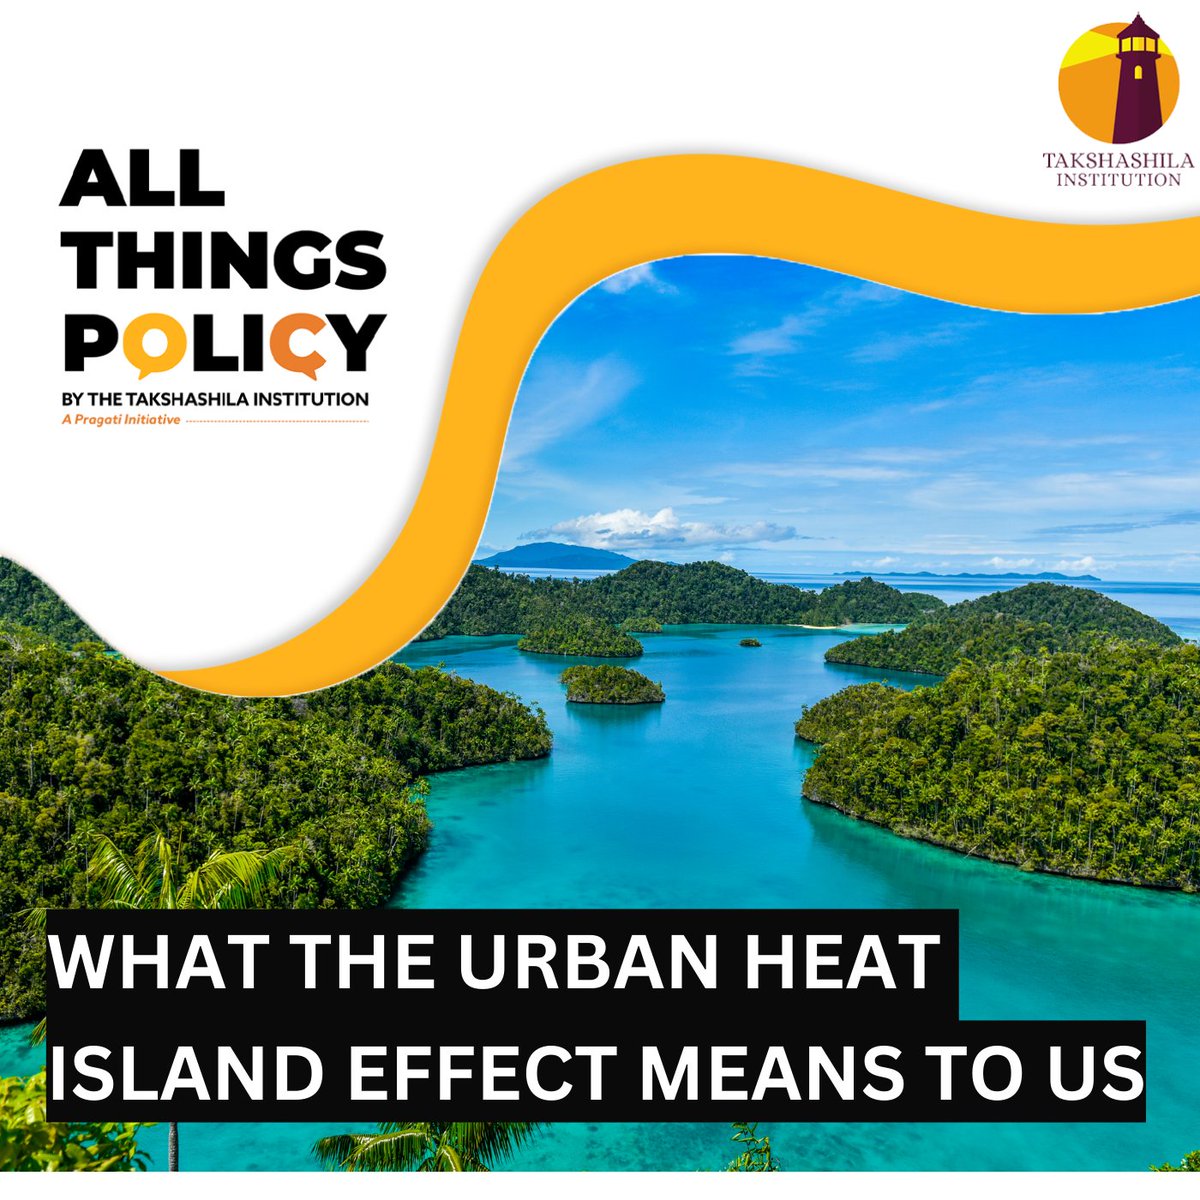 If 2023 was the hottest year on record, 2024 threatens to be worse. To understand urban heat waves, we ought to be aware of the Urban Heat Island effect and what it does to our cities. @prof_nithiya and @SachinKalbag discuss this important issue. 🎧shorturl.at/9gEIU